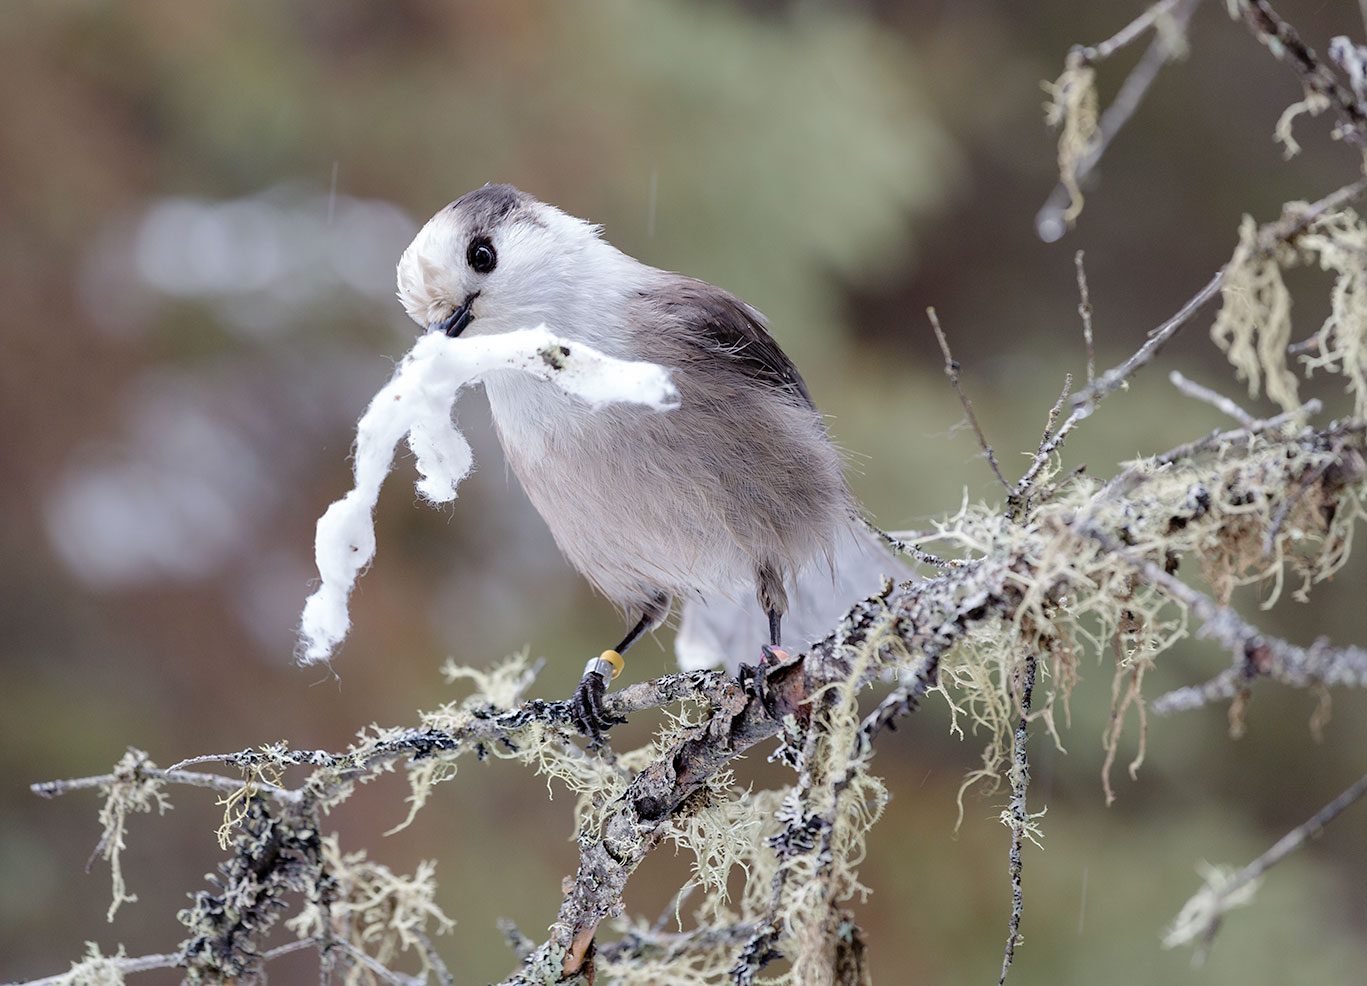 White, fluffy cotton is handy for Gray Jays as nesting material—and for scientists tracking where the jays go. Photo by Brett Forsyth.